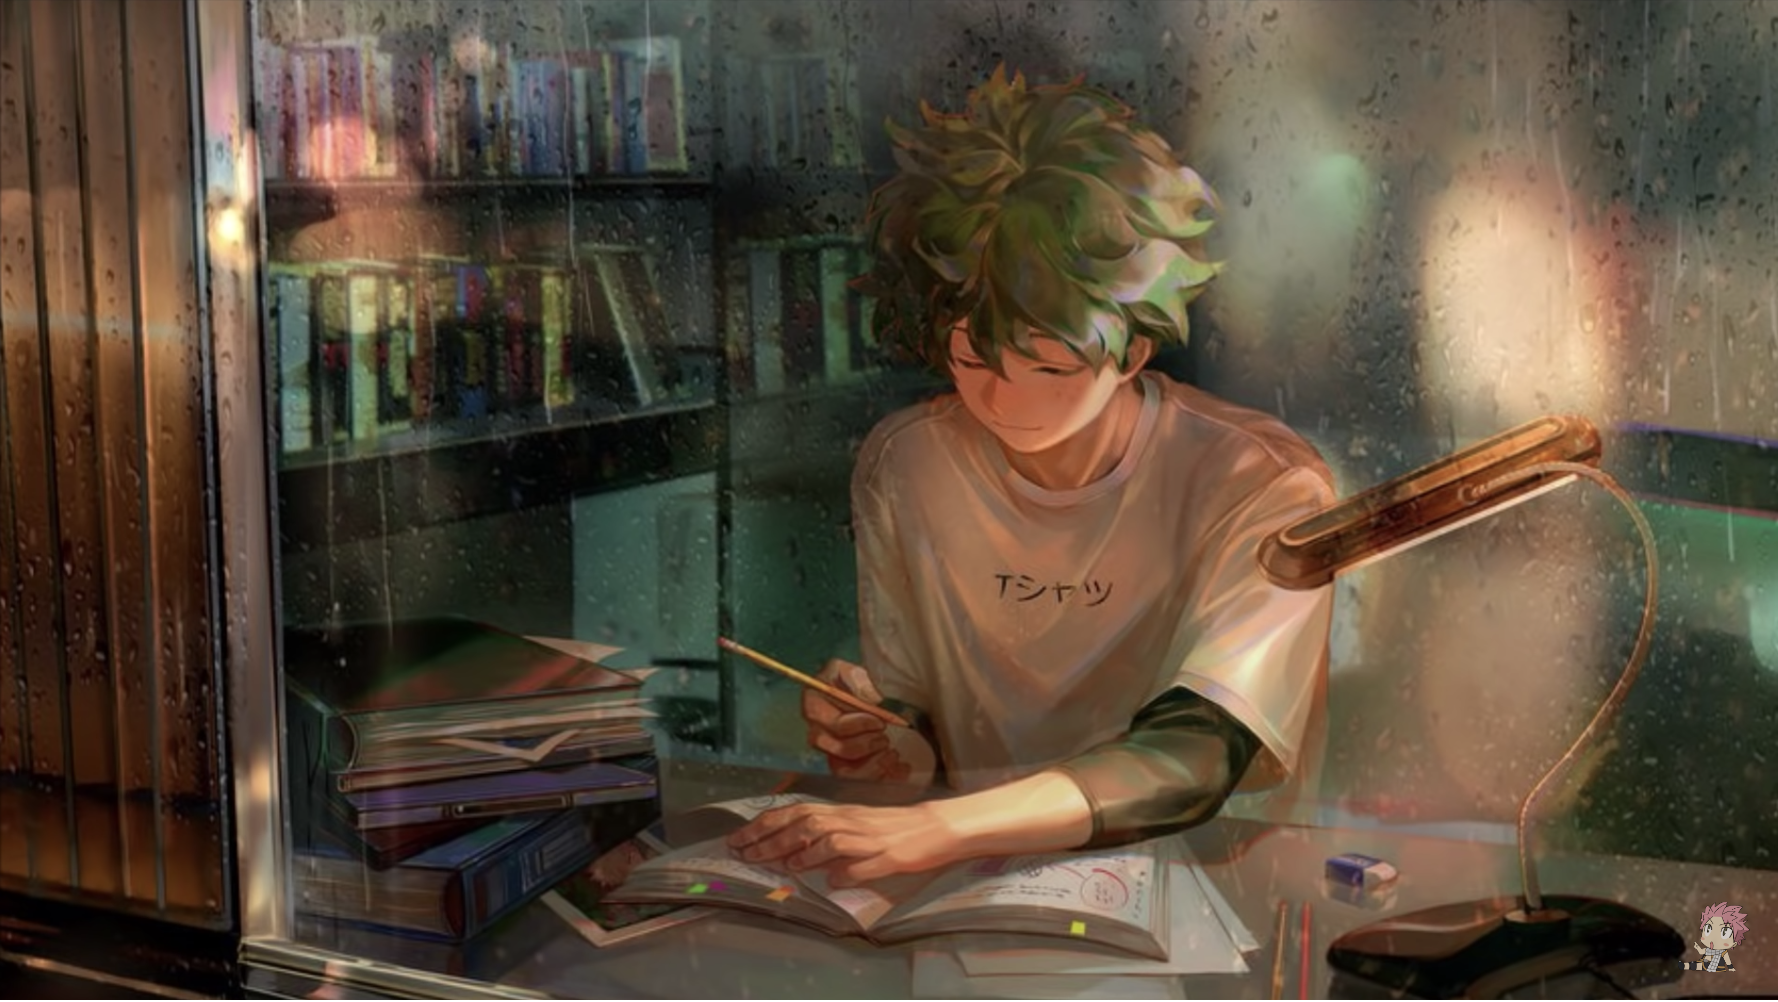 Anime Studying Wallpaper Free Anime Studying Background